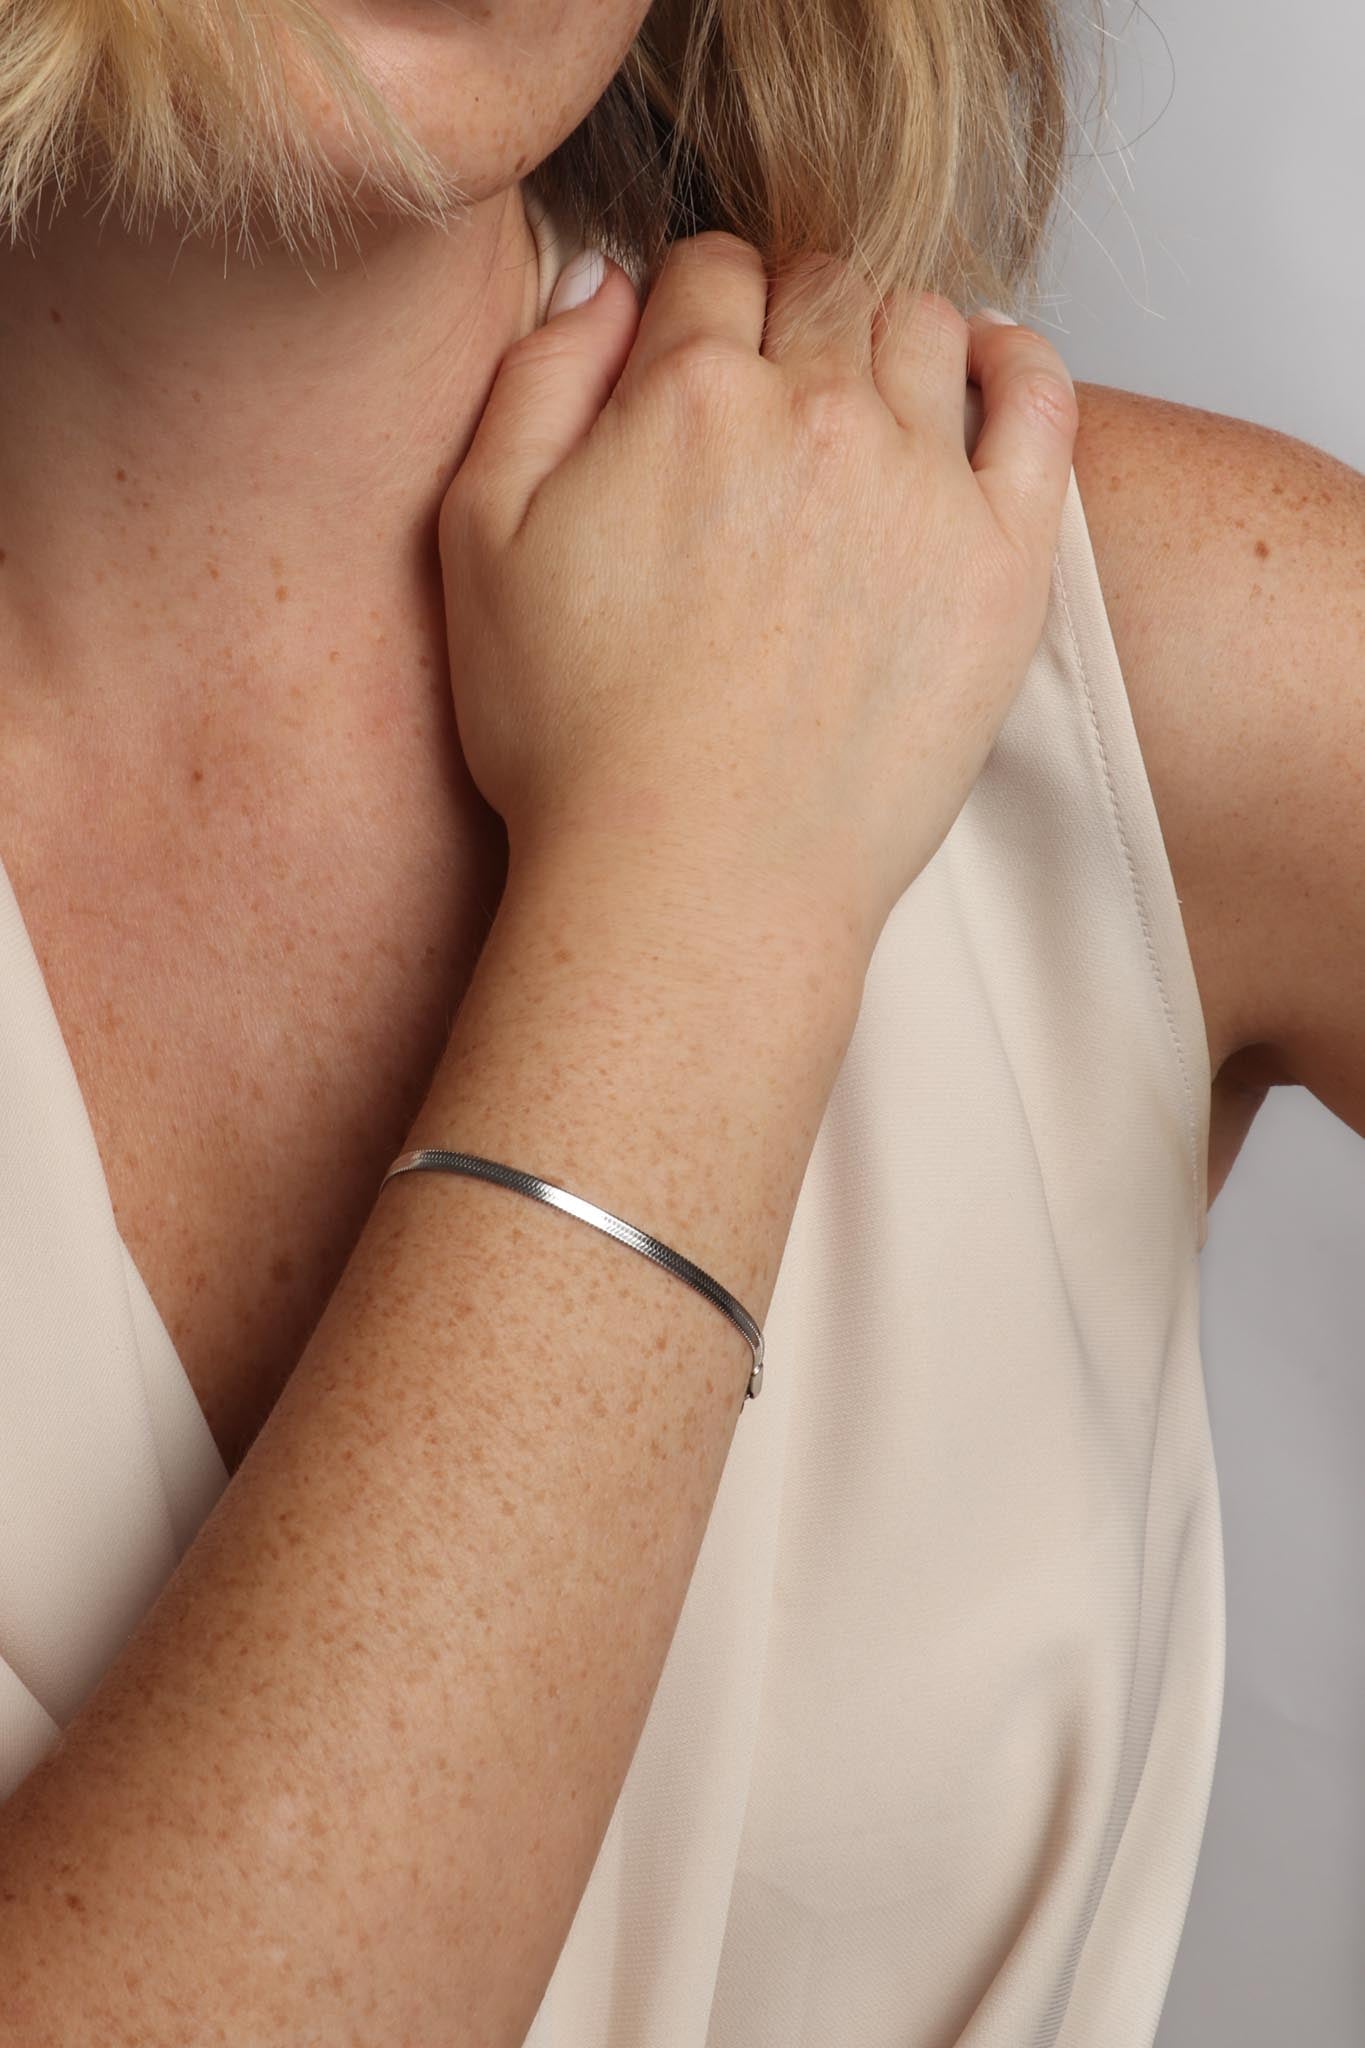 Marrin Costello wearing Marrin Costello Jewelry 3mm thick herringbone snake chain bracelet with lobster clasp closure. Waterproof, sustainable, hypoallergenic. Polished stainless steel.